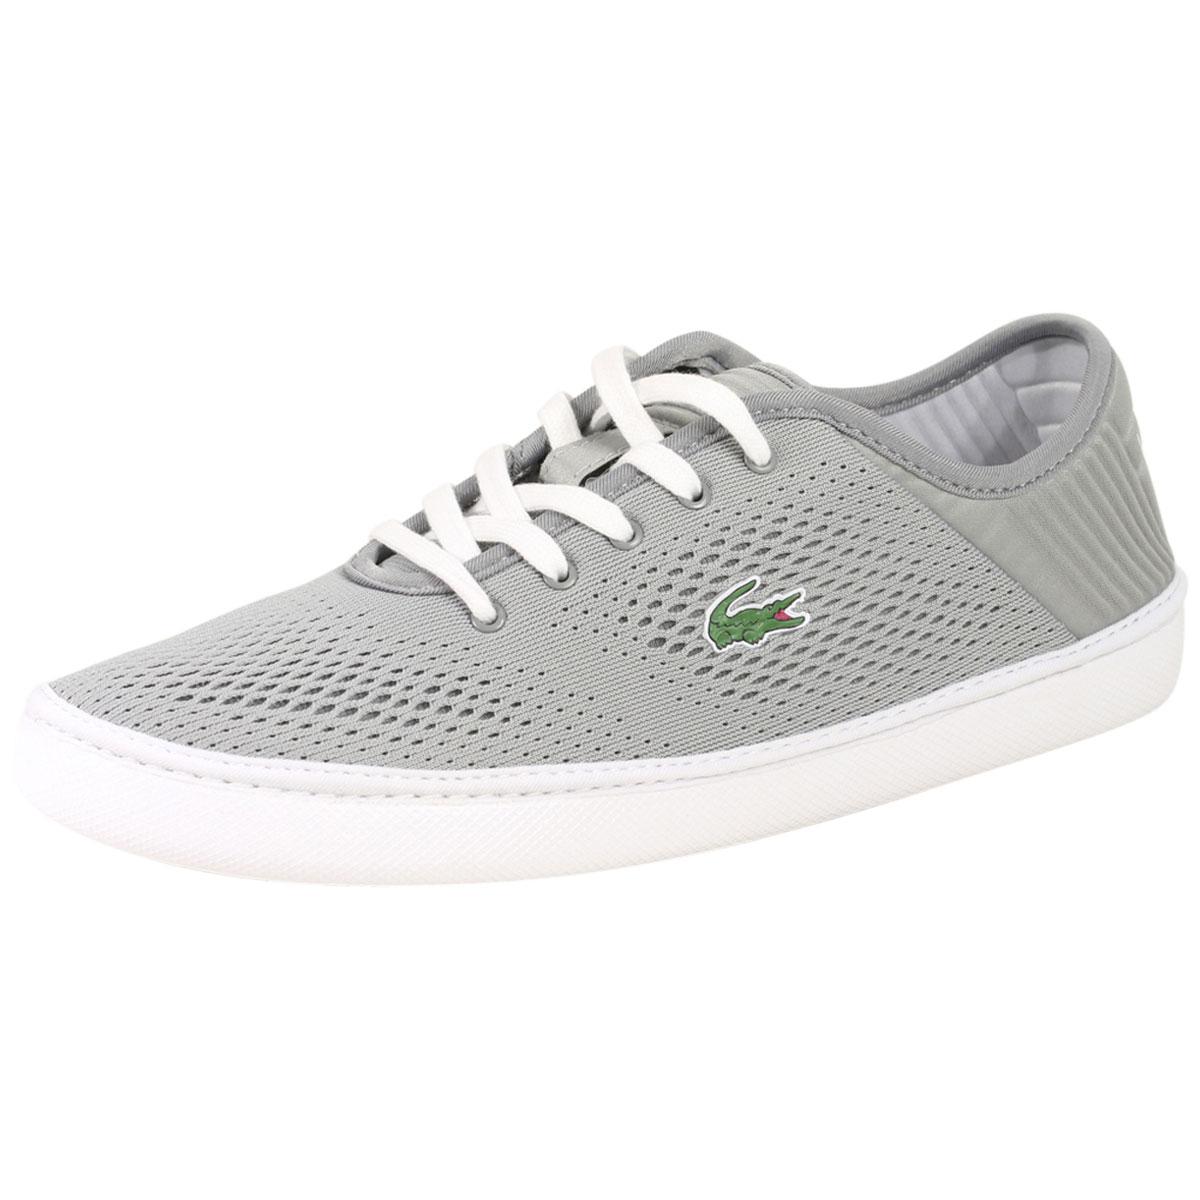 L.Ydro-Lace-118 Trainers Sneakers Shoes